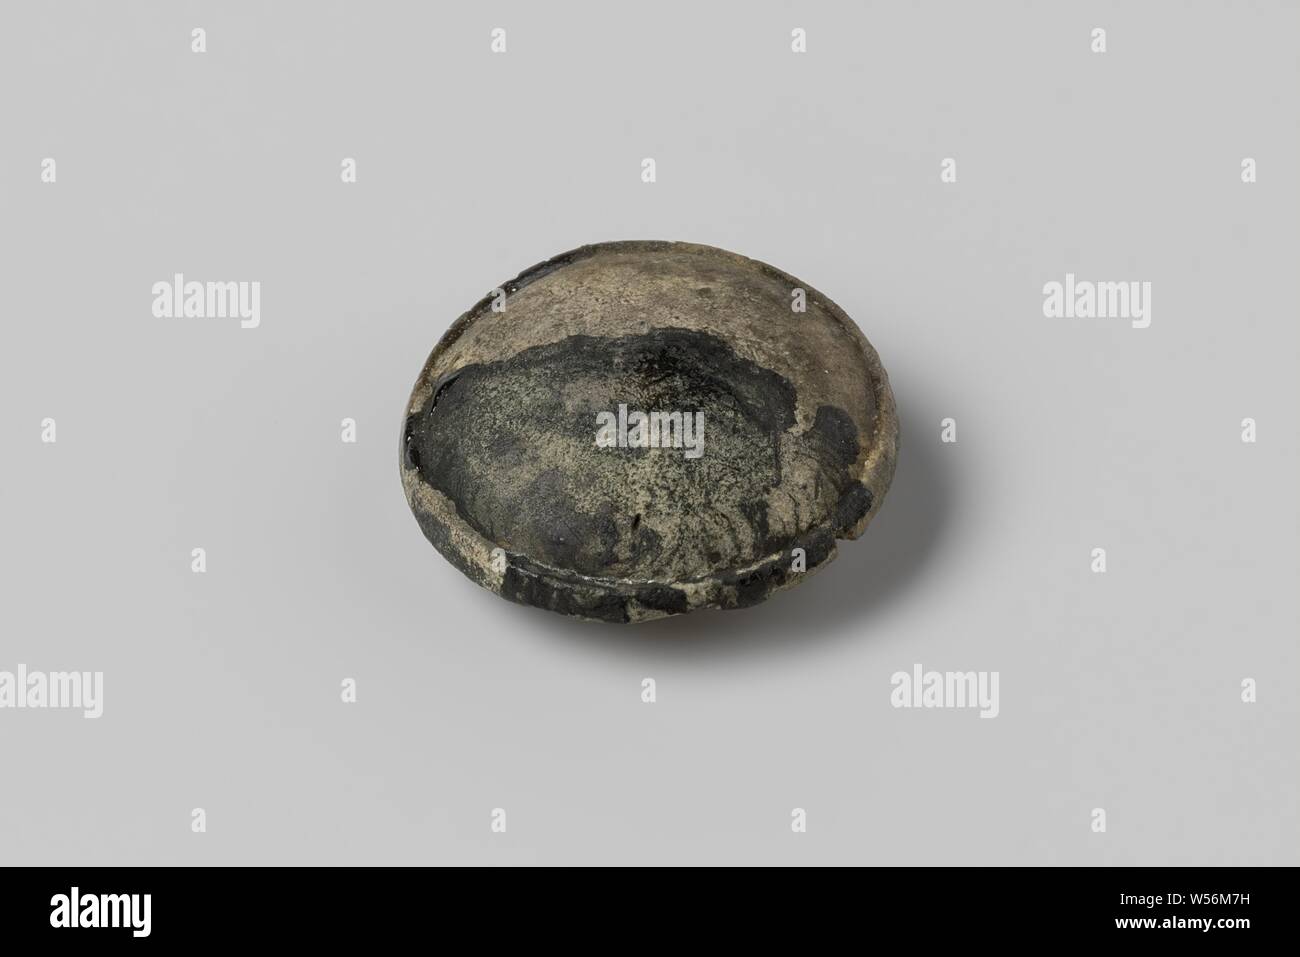 Button from the wreck of the East Indies ship Hollandia, Knoop. (1), Annet, Dutch East India Company, Hollandia (ship), anonymous, Netherlands, 1700 - in or before 13-Aug-1743, bone (material), h 0.5 cm × d 1.8 cm Stock Photo